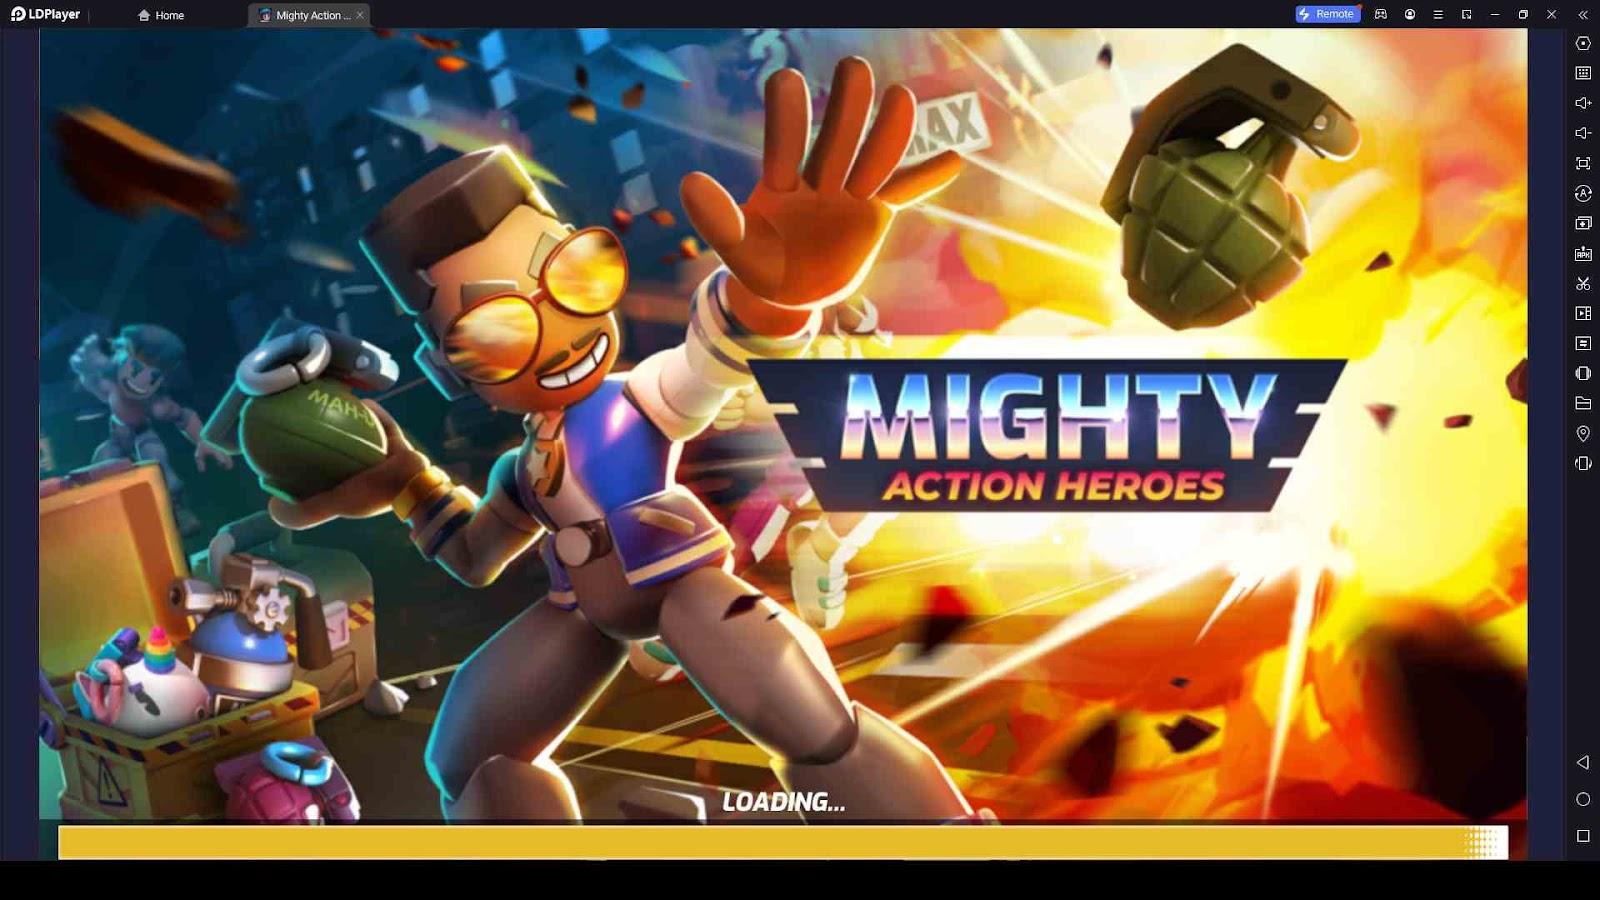 Tips and Tricks to Play Mighty Action Heroes